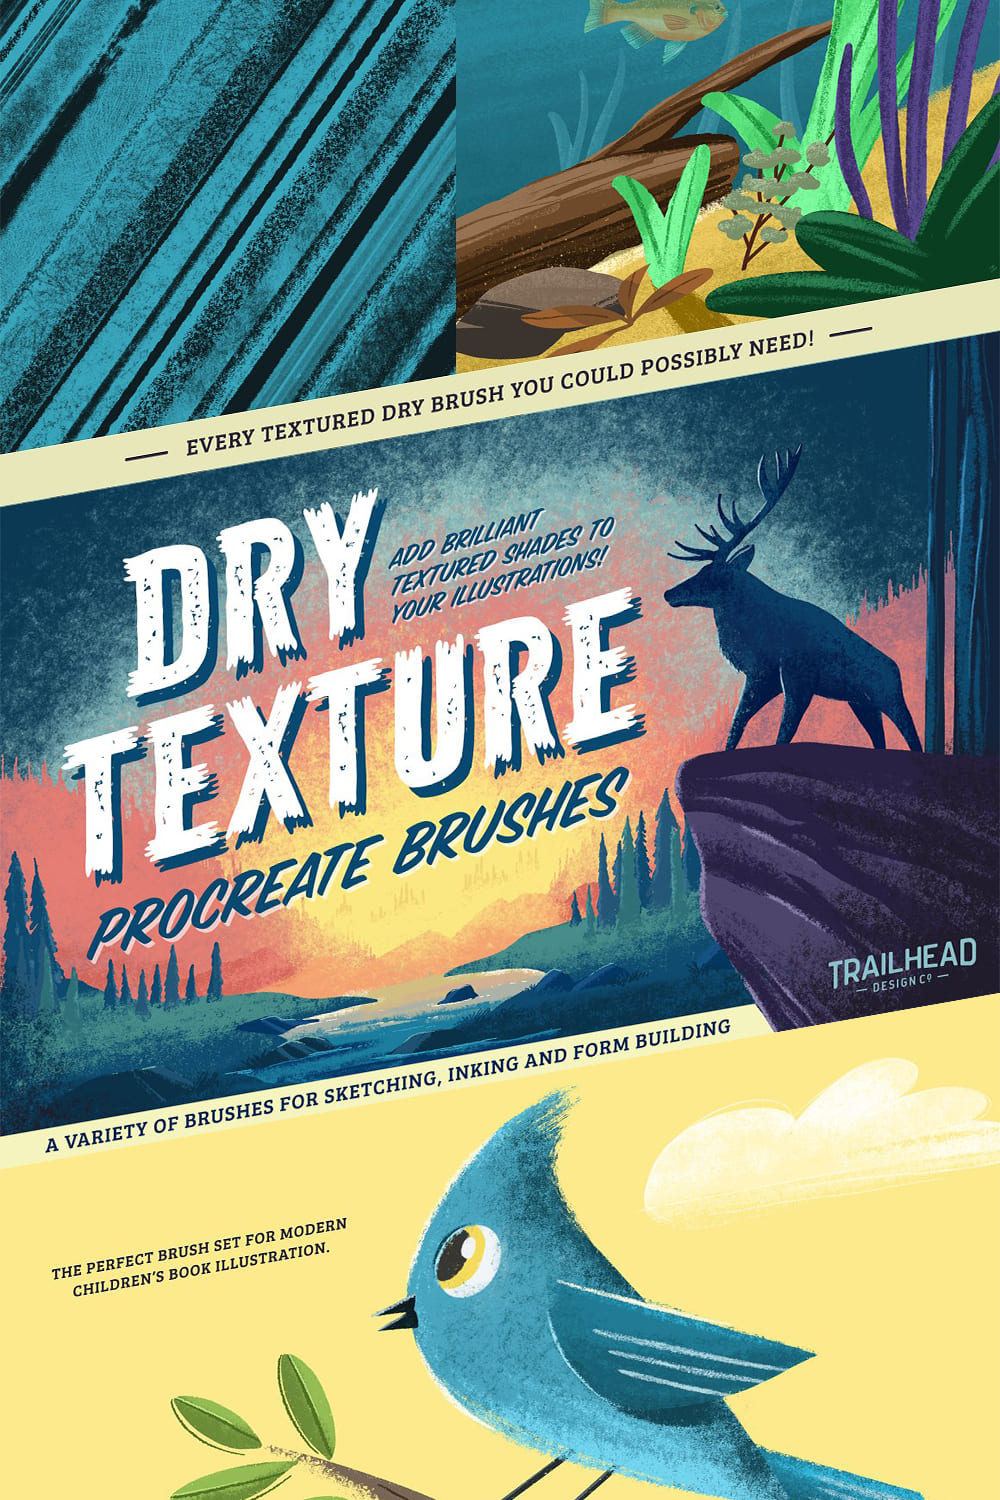 Dry Texture Brushes for Procreate - Pinterest.